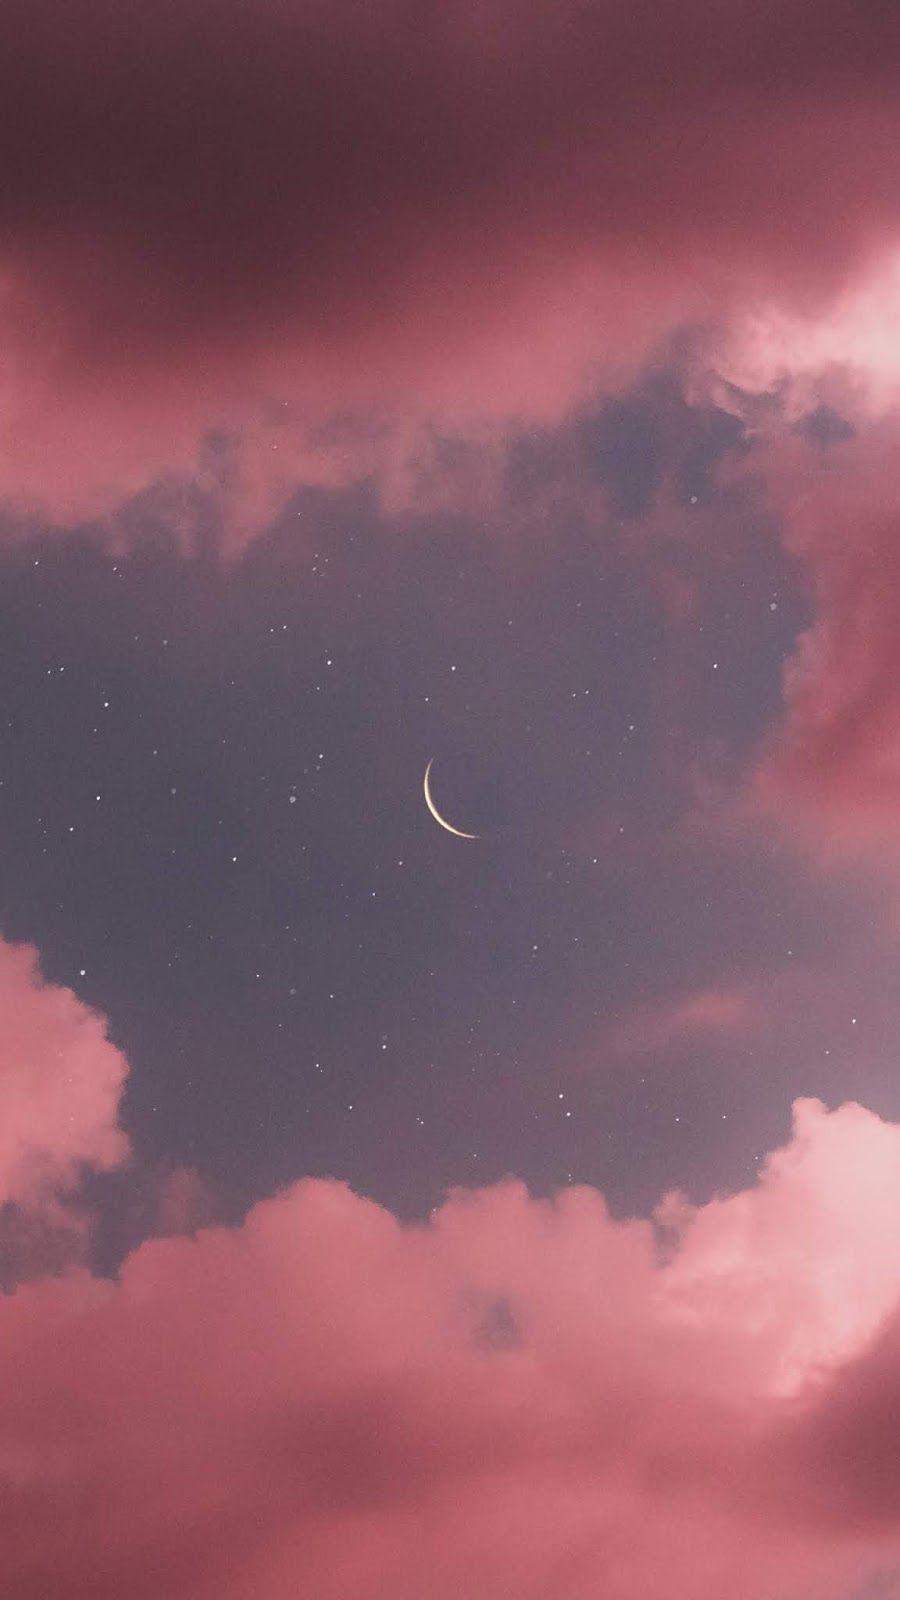 Crescent moon in the pink sky .com